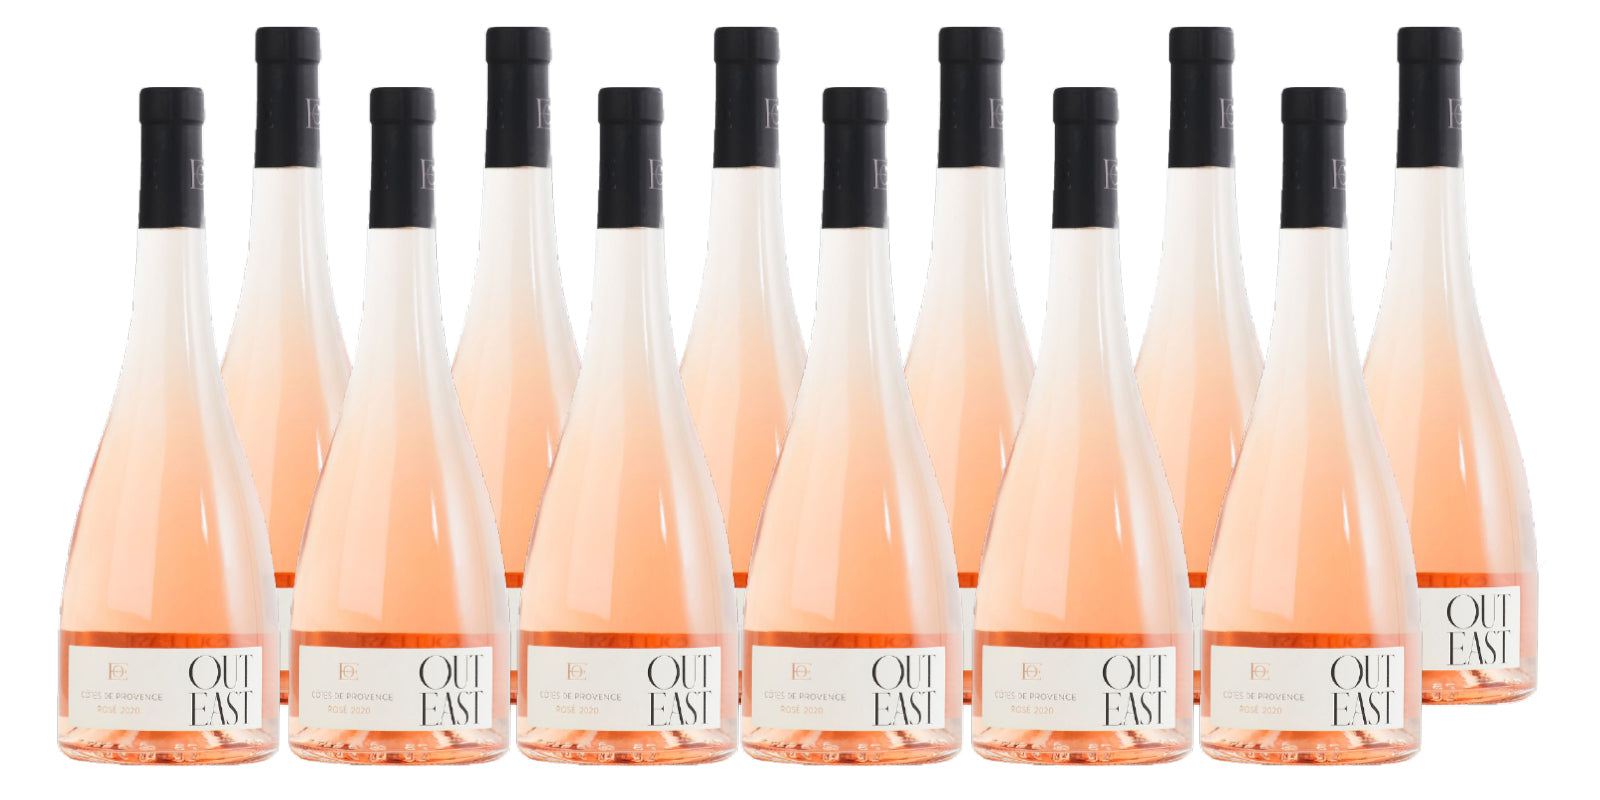 Buy 4, Get 8 FREE: Out East Provence Rosé